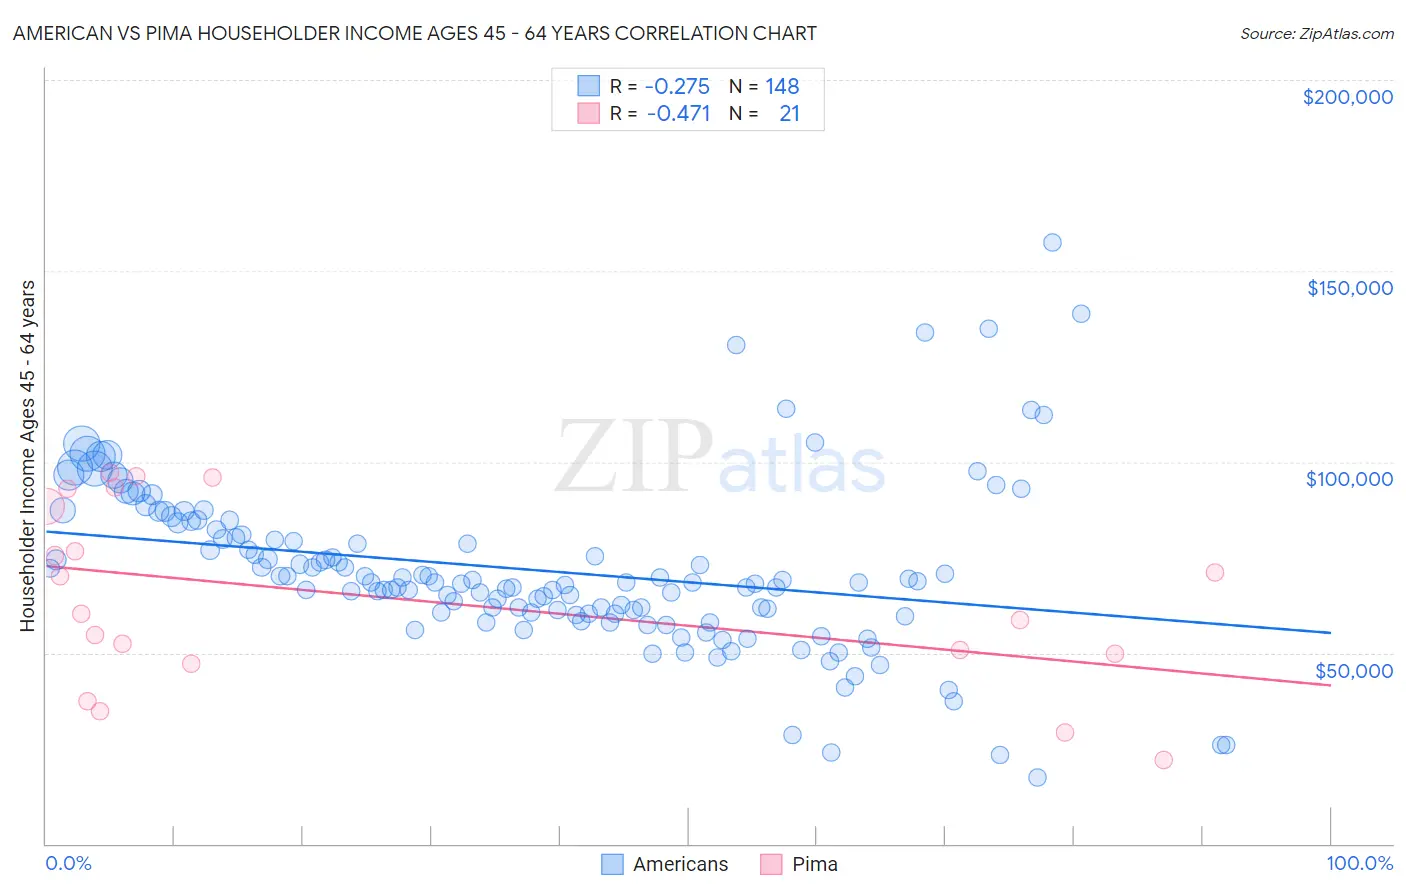 American vs Pima Householder Income Ages 45 - 64 years